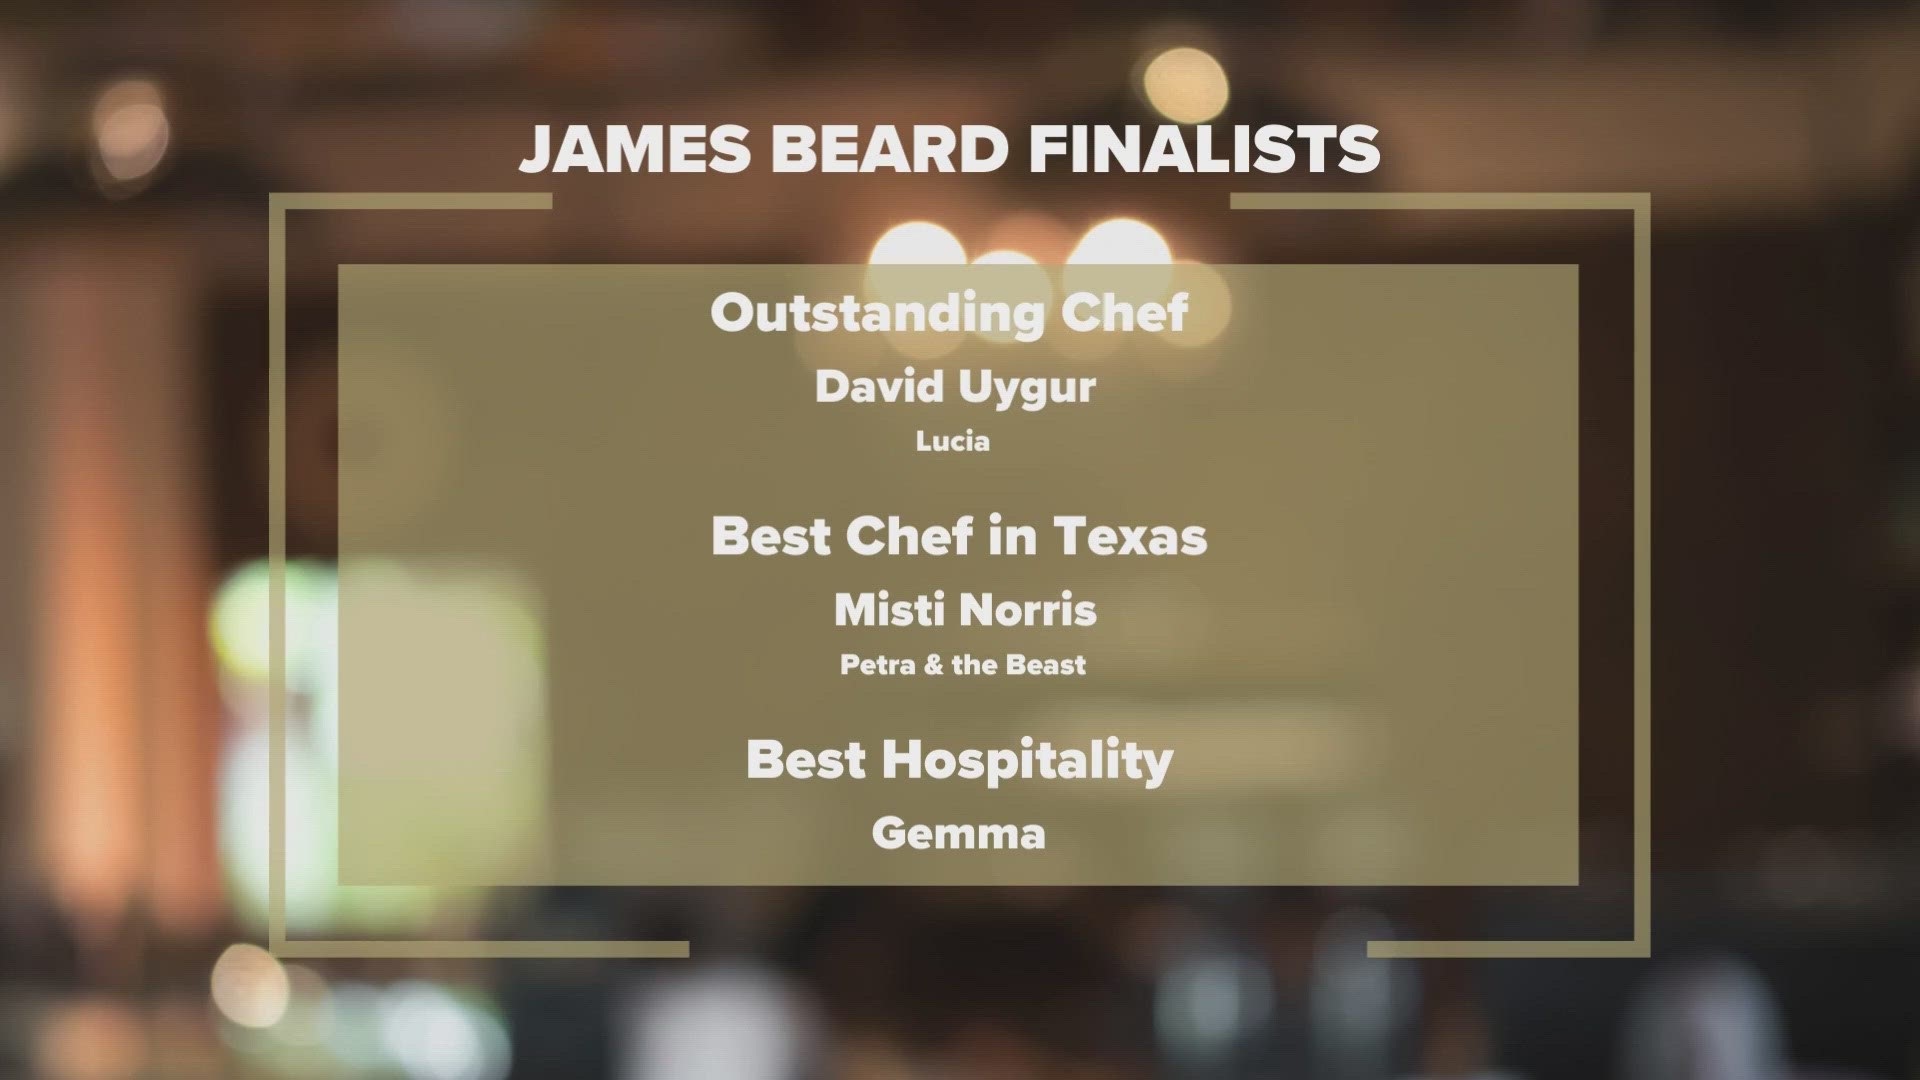 Dallas has three finalists for the prestigious James Beard awards. They're given to the best in the restaurant business.